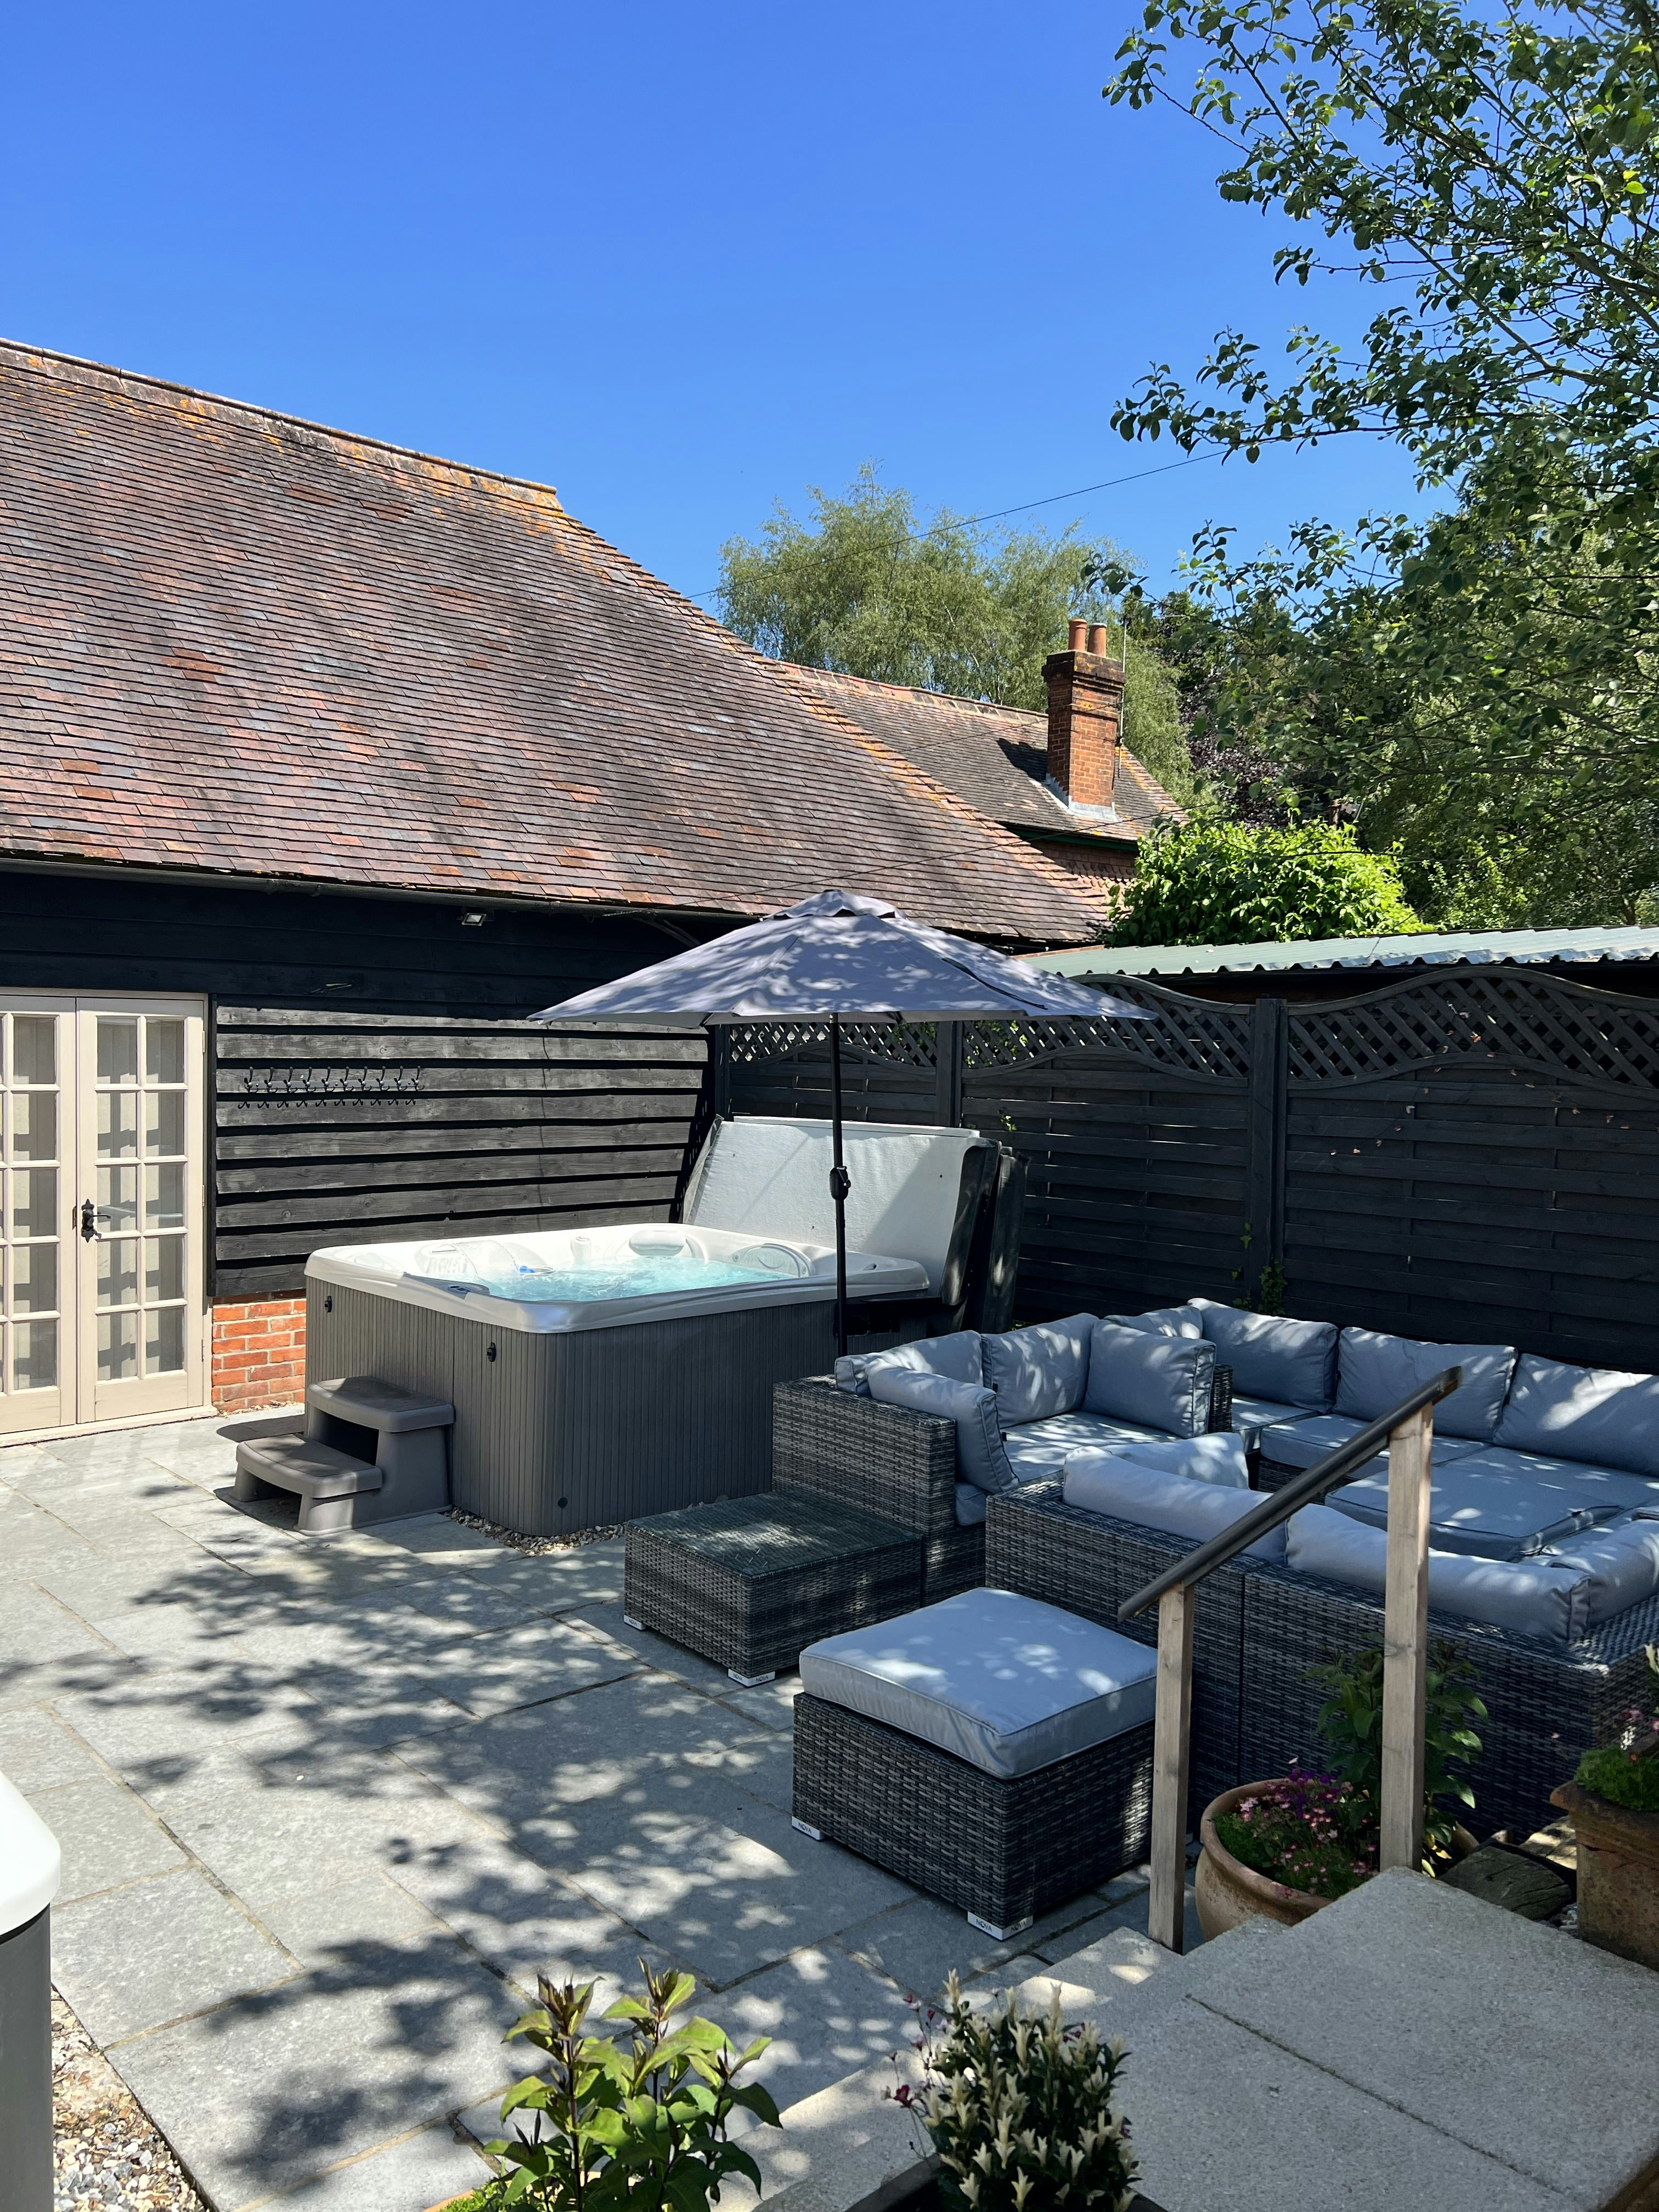 An external image of day spa Laurabella in Basingstoke. The image shows a seating area and hot tub on a paved patio. The sky is blue and in the backdrop is the rear of the building, a tiled roof with wooden cladded walls.